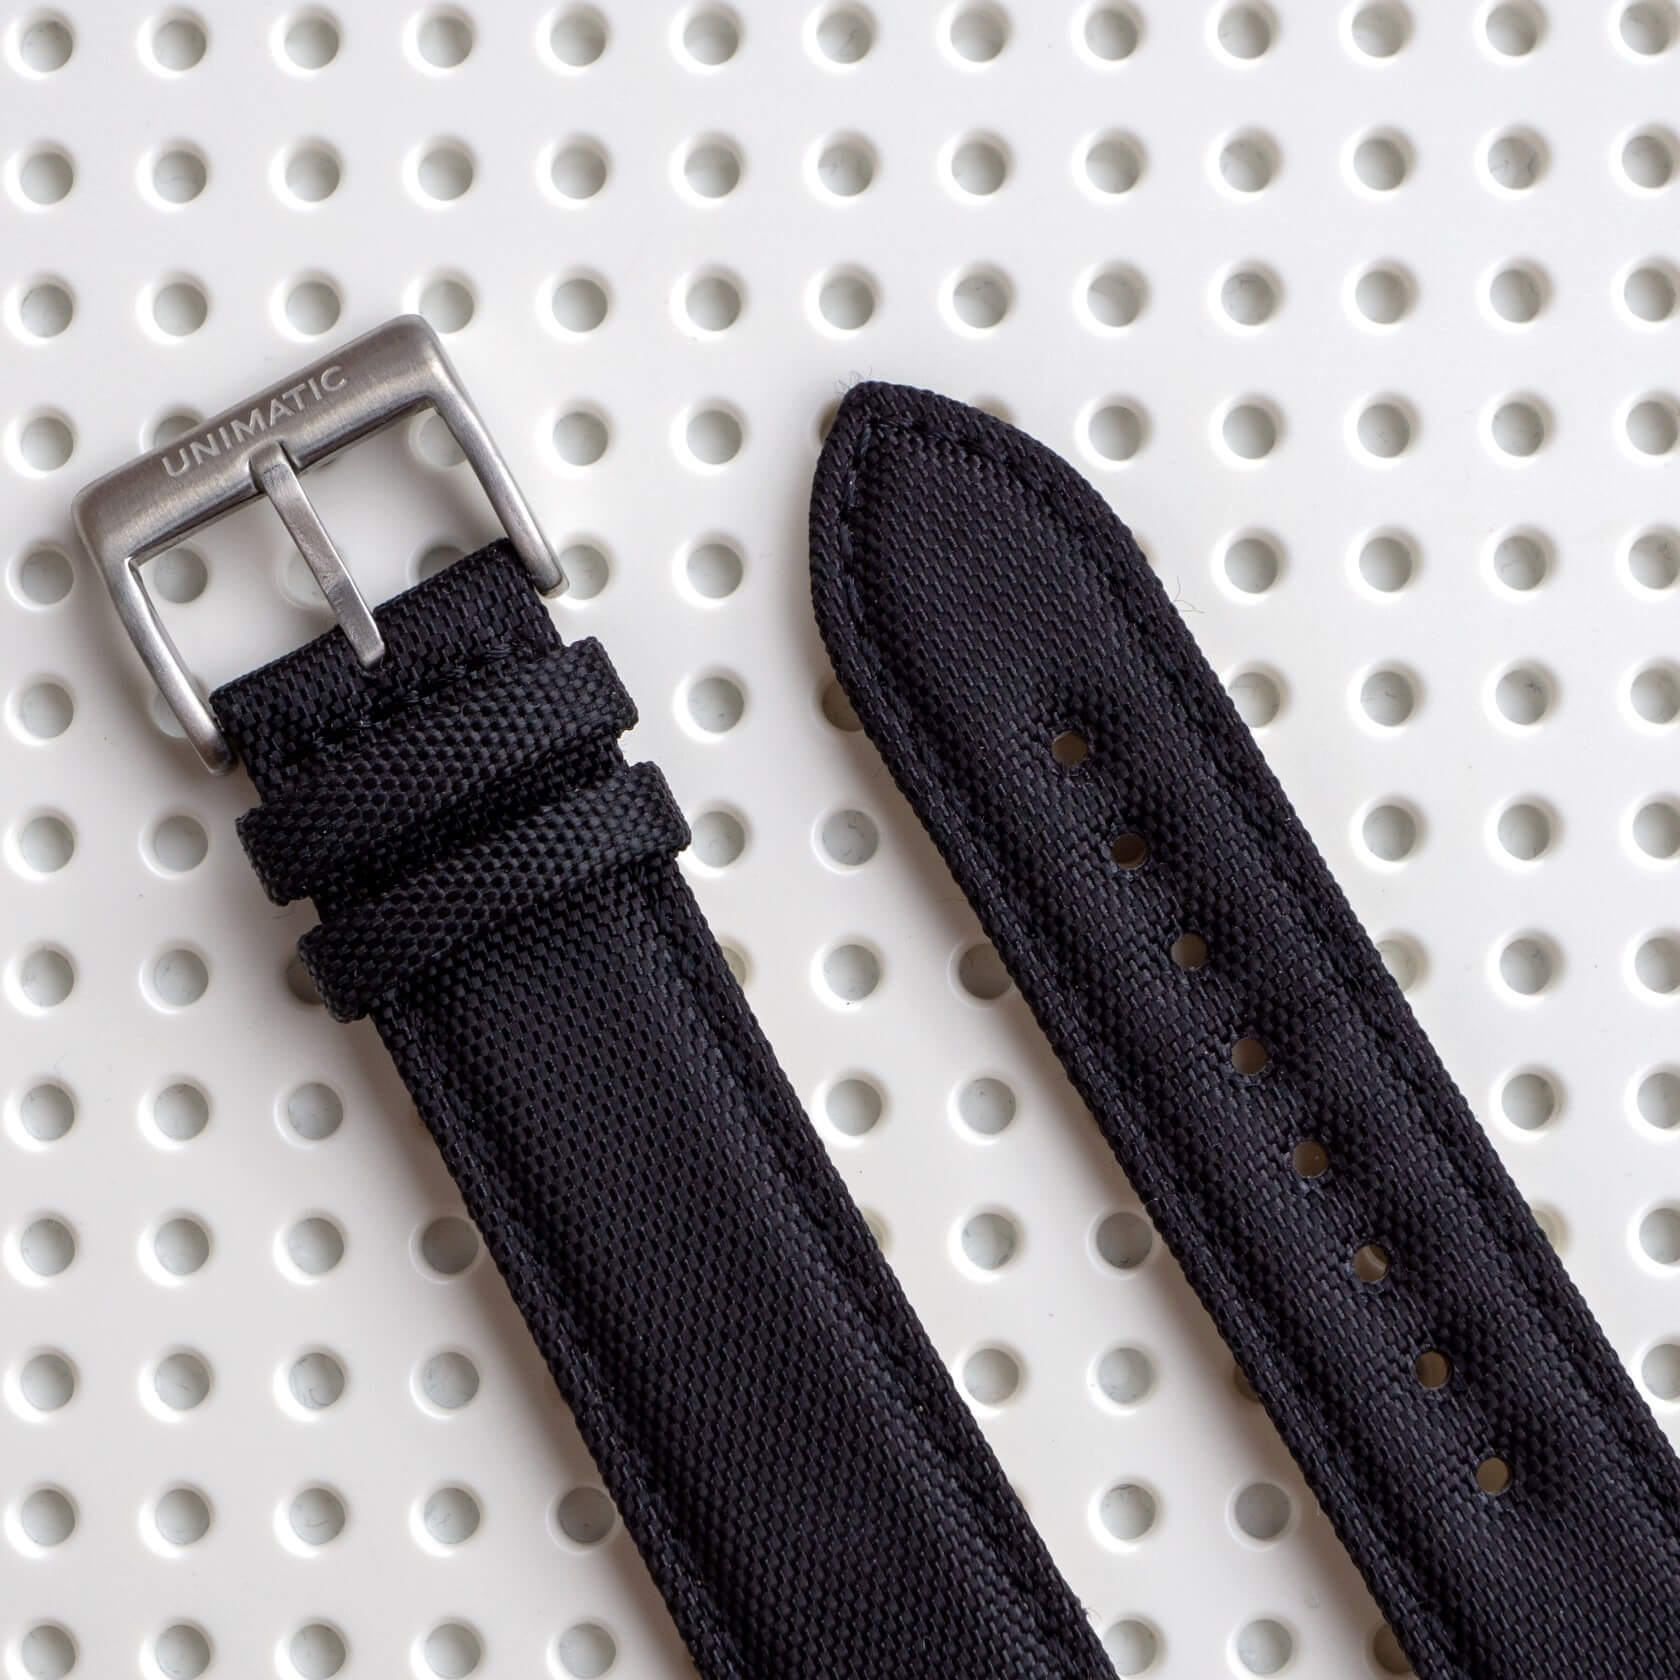 The strap is made from quality Cordura® fabric